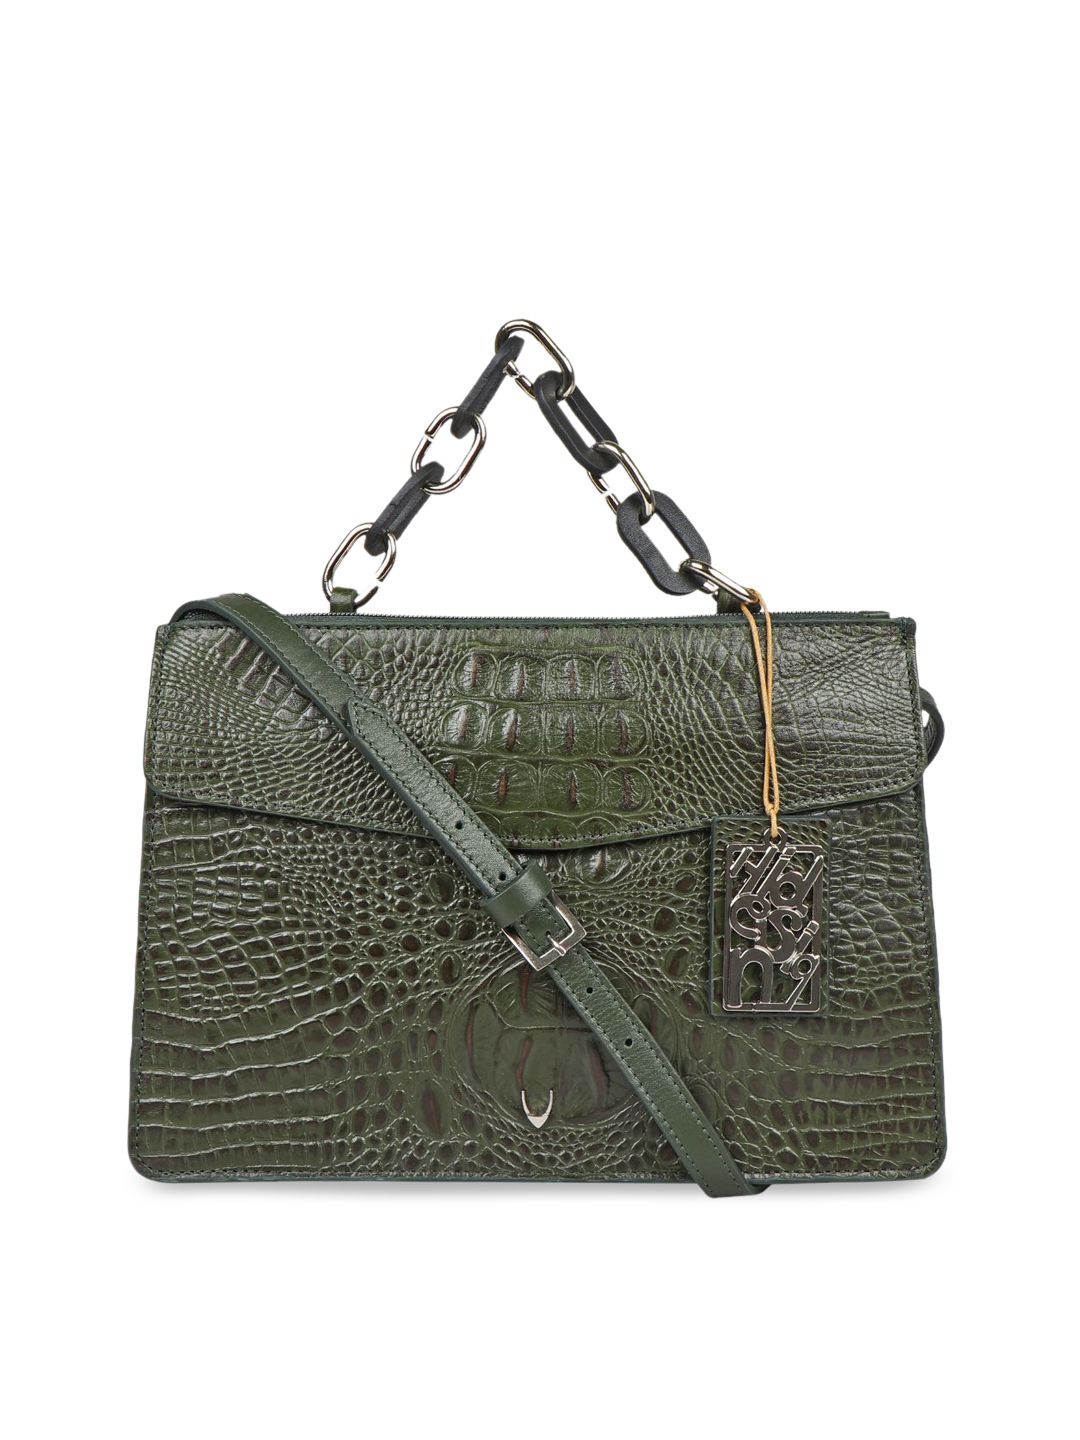 Hidesign Green Textured Leather Oversized Structured Satchel with Quilted Price in India